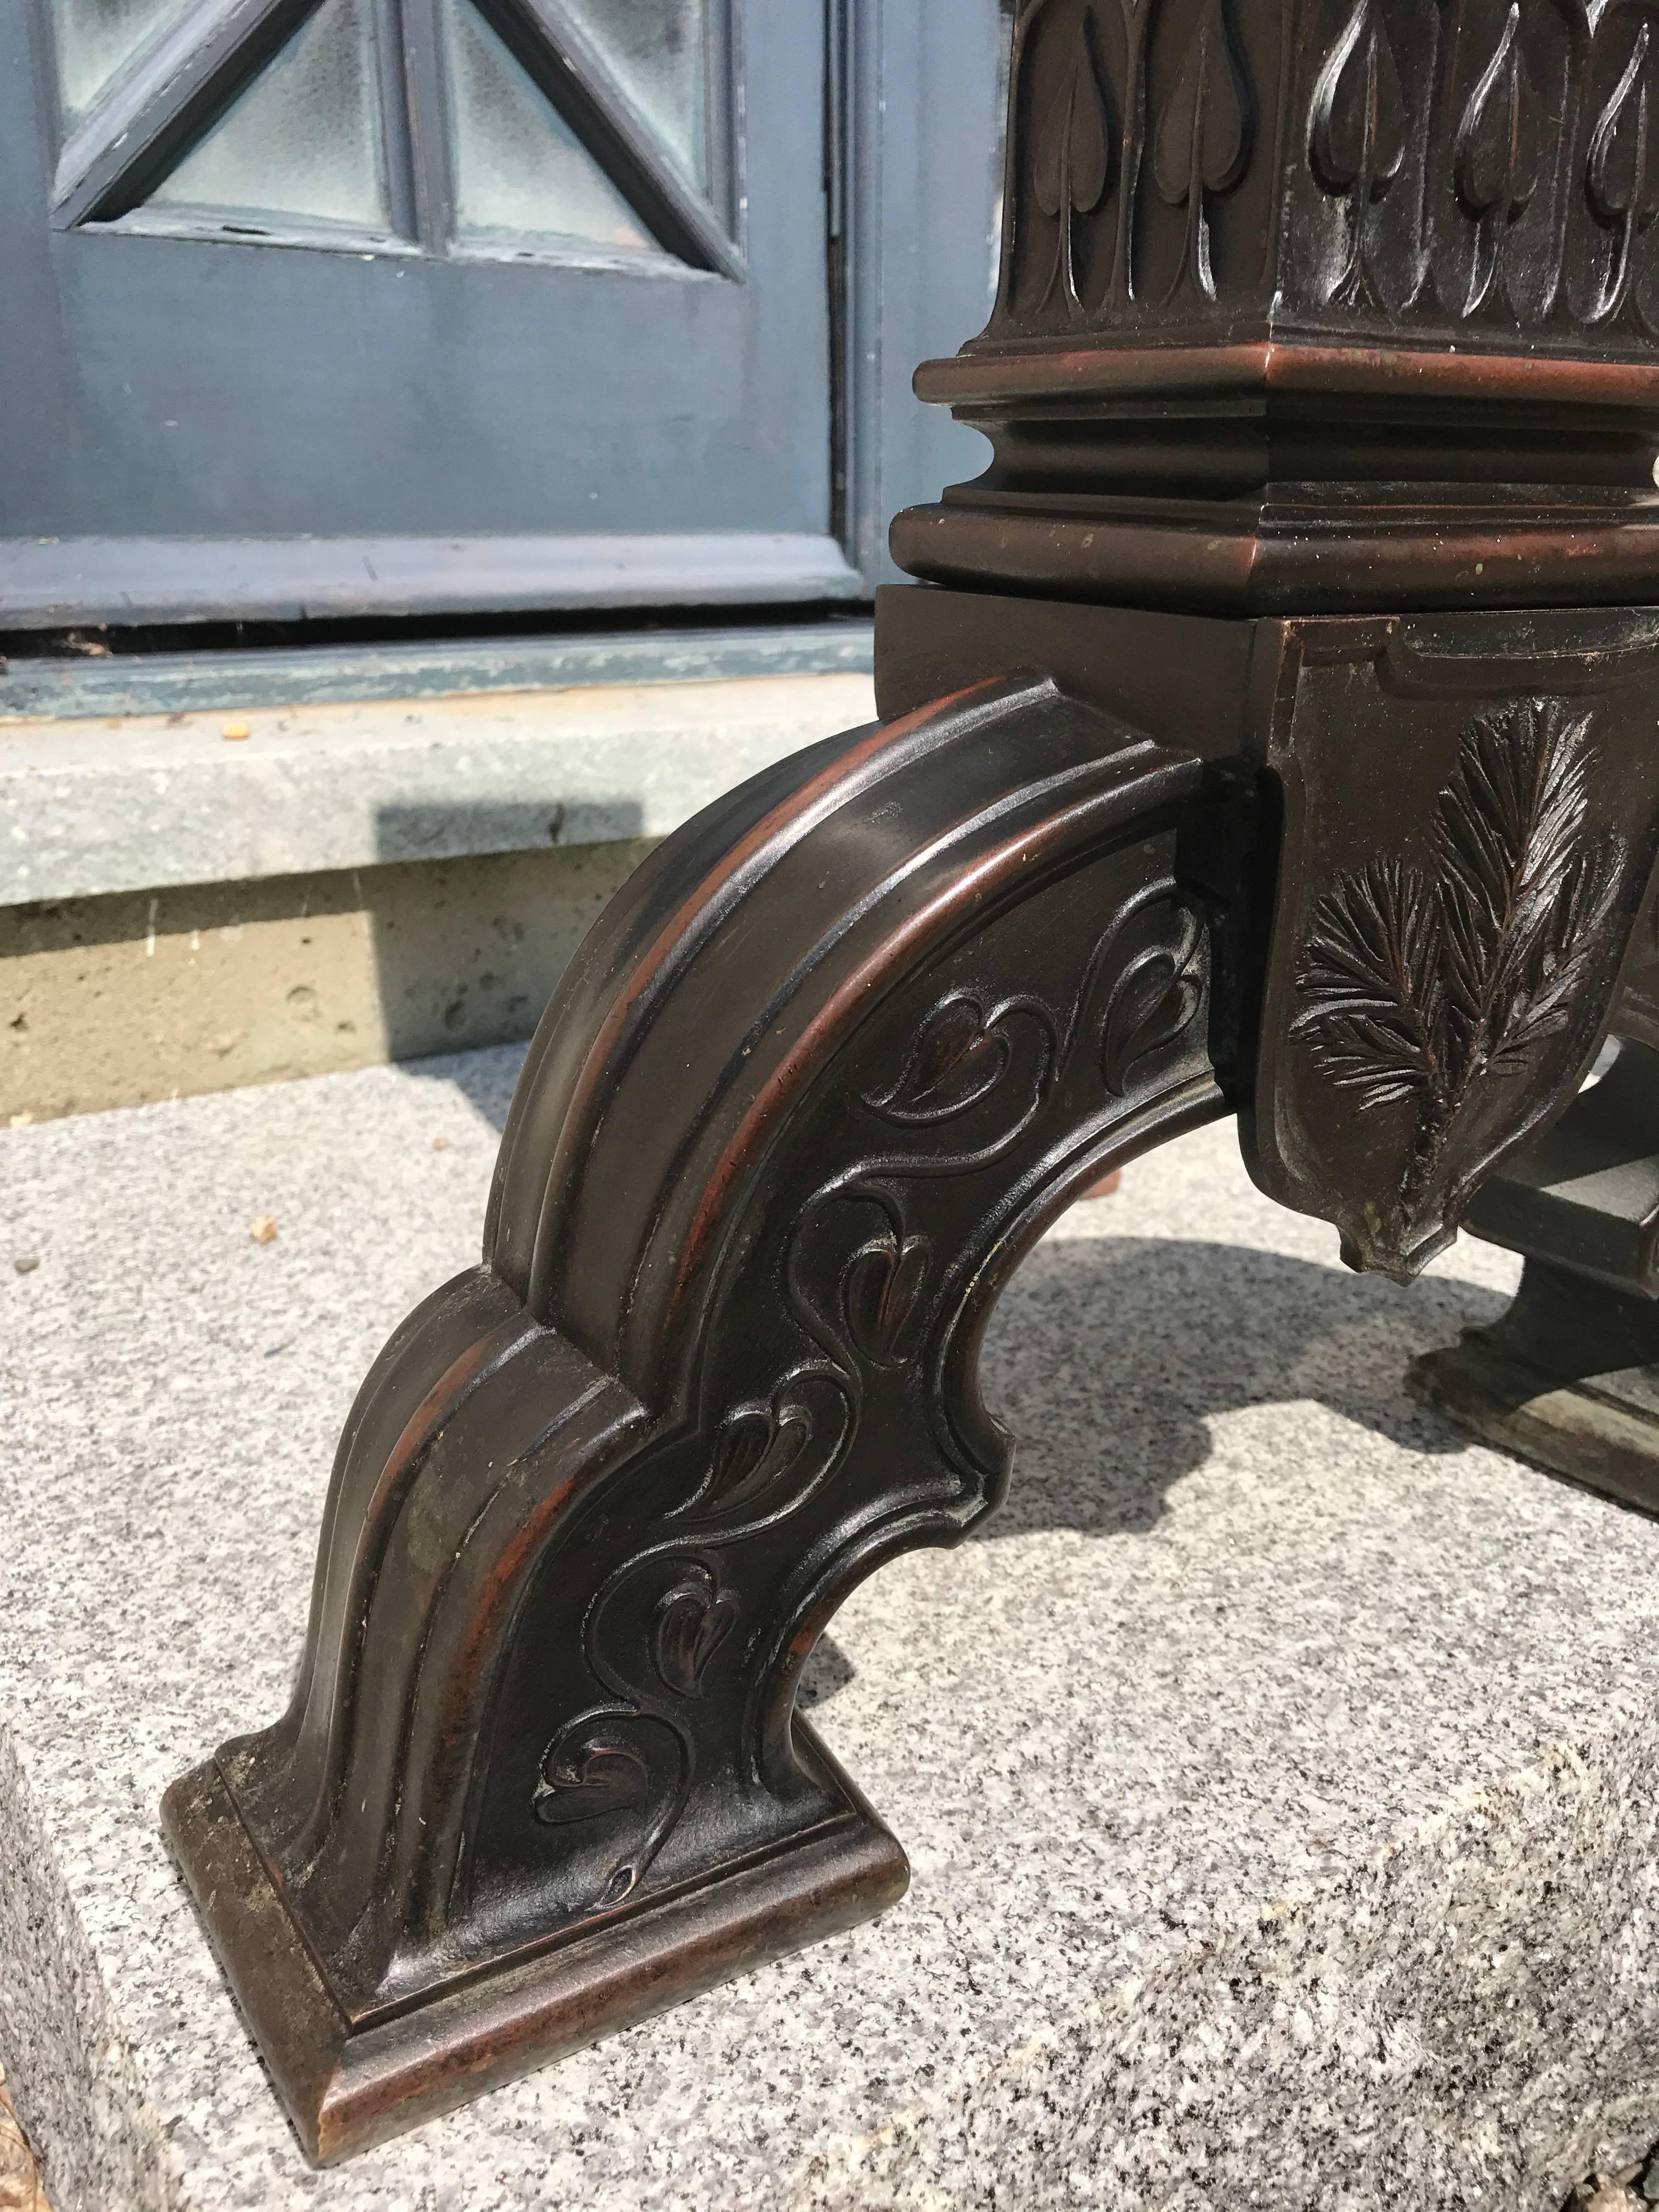 A magnificent pair of large-scale Arts & Crafts period solid bronze andirons.
They maintain their original Patina. The fine craftsmanship and original Design suggests that they were commissioned for a Grand Estate. They weigh about 30 pounds each